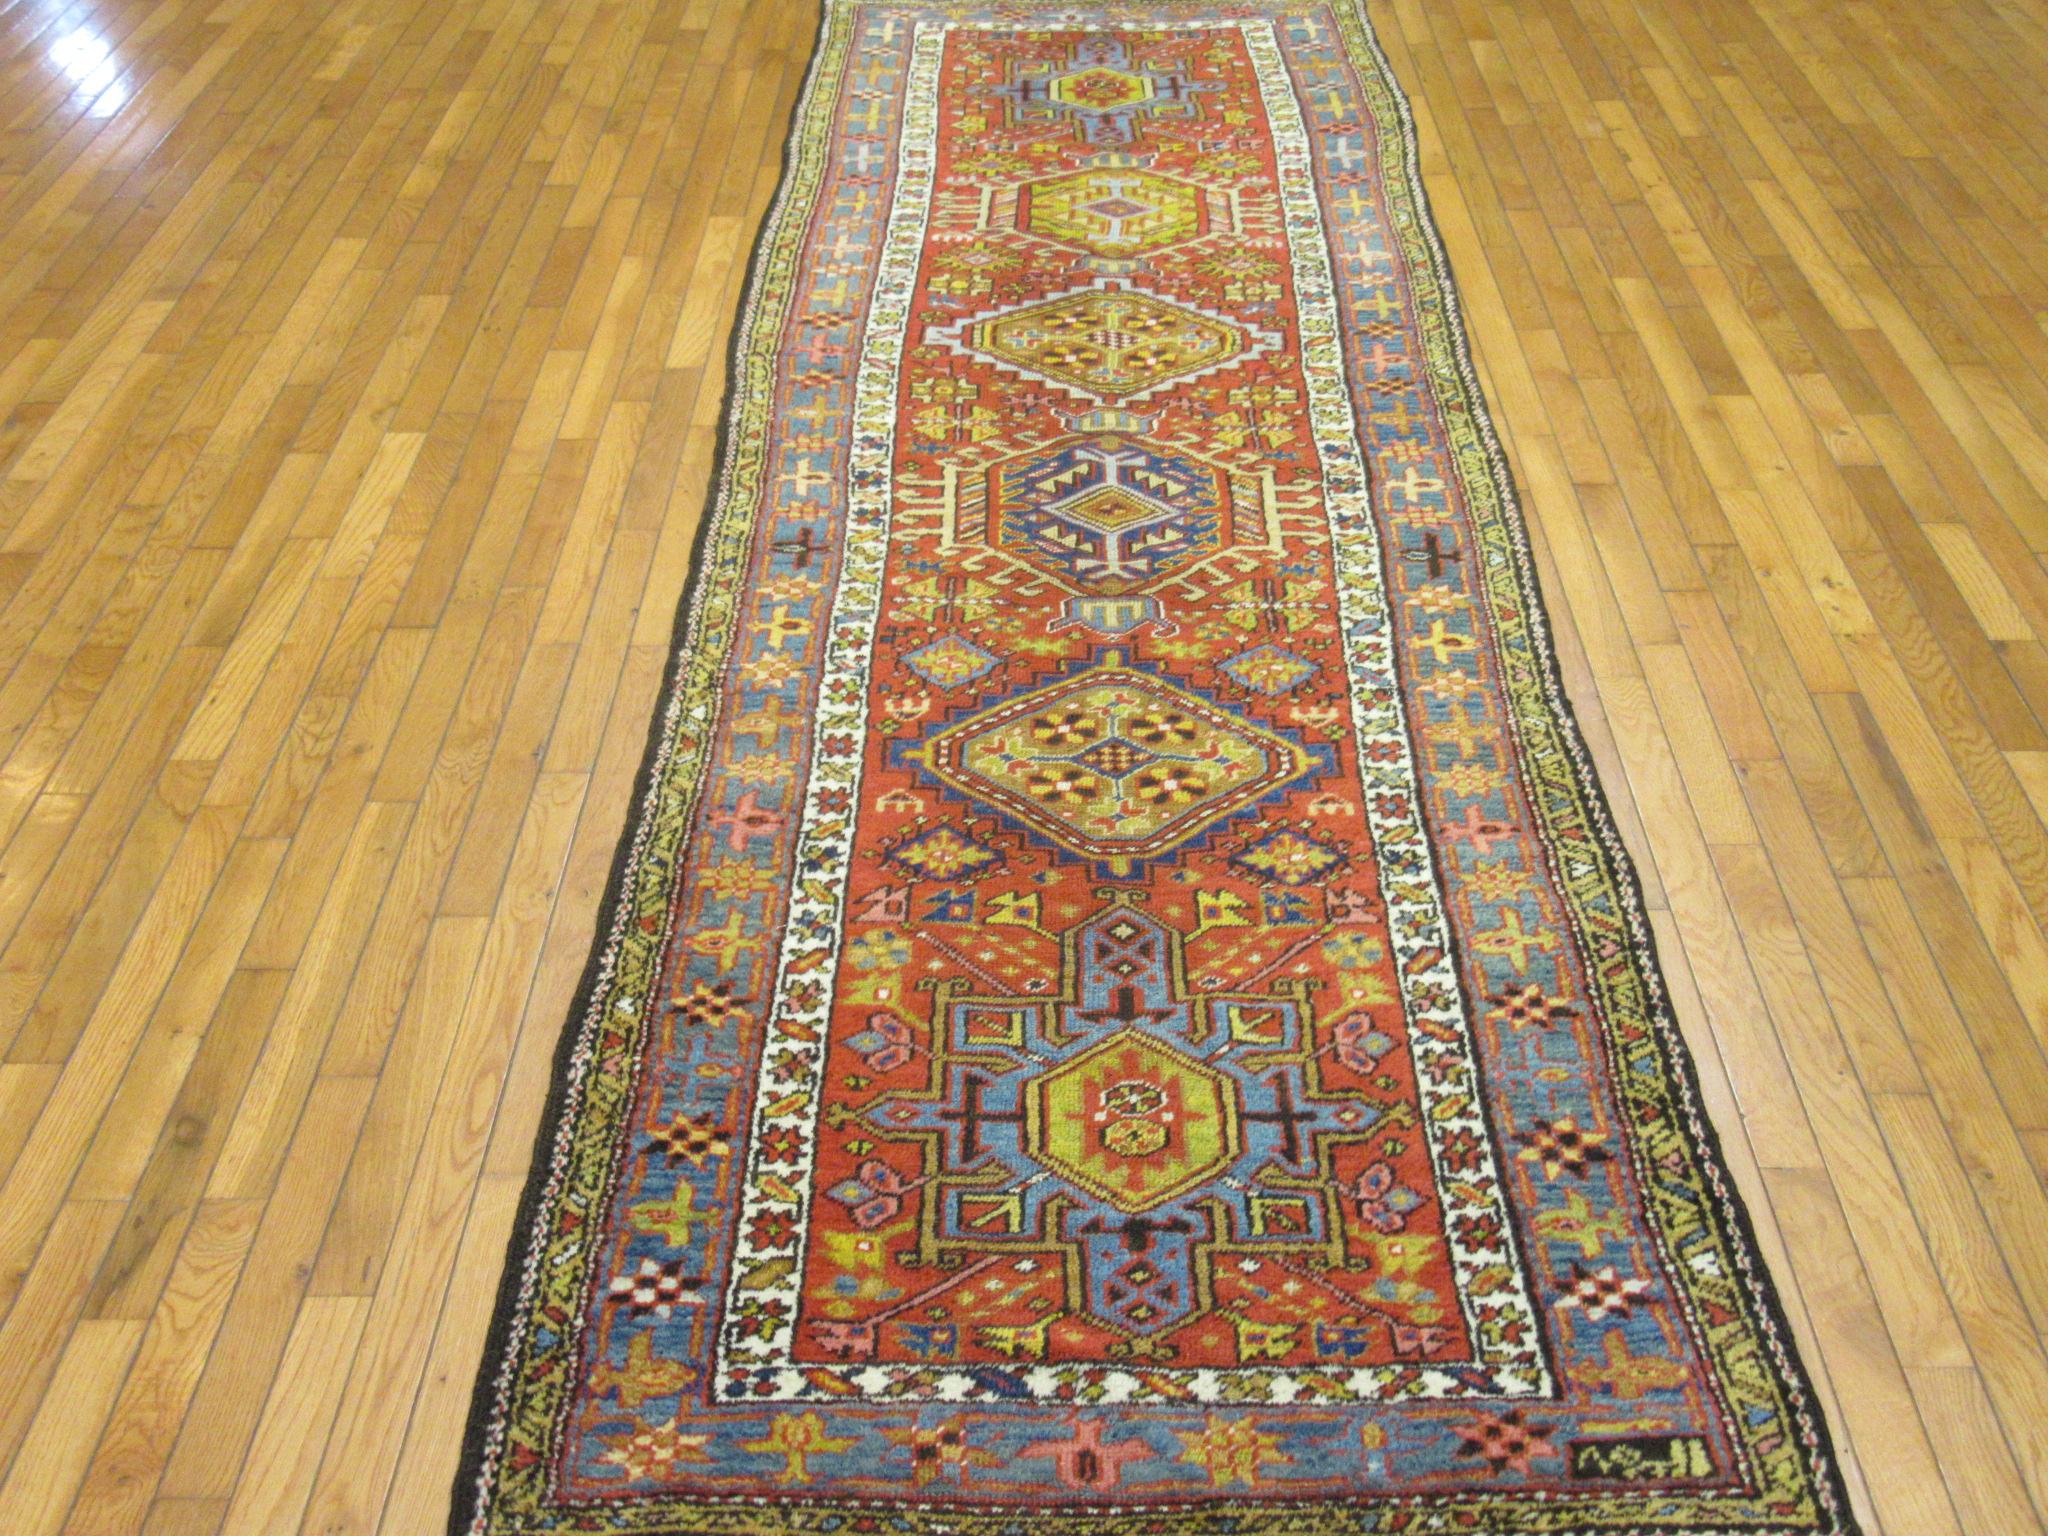 This is an antique hand knotted long Persian Heriz runner rug. It has the trademark multiple geometric medallions design of the neighbouring Karajeh rugs. It is made with naturally dyed wool pile on a cotton foundation. The rug measures 3' 5'' x 11'